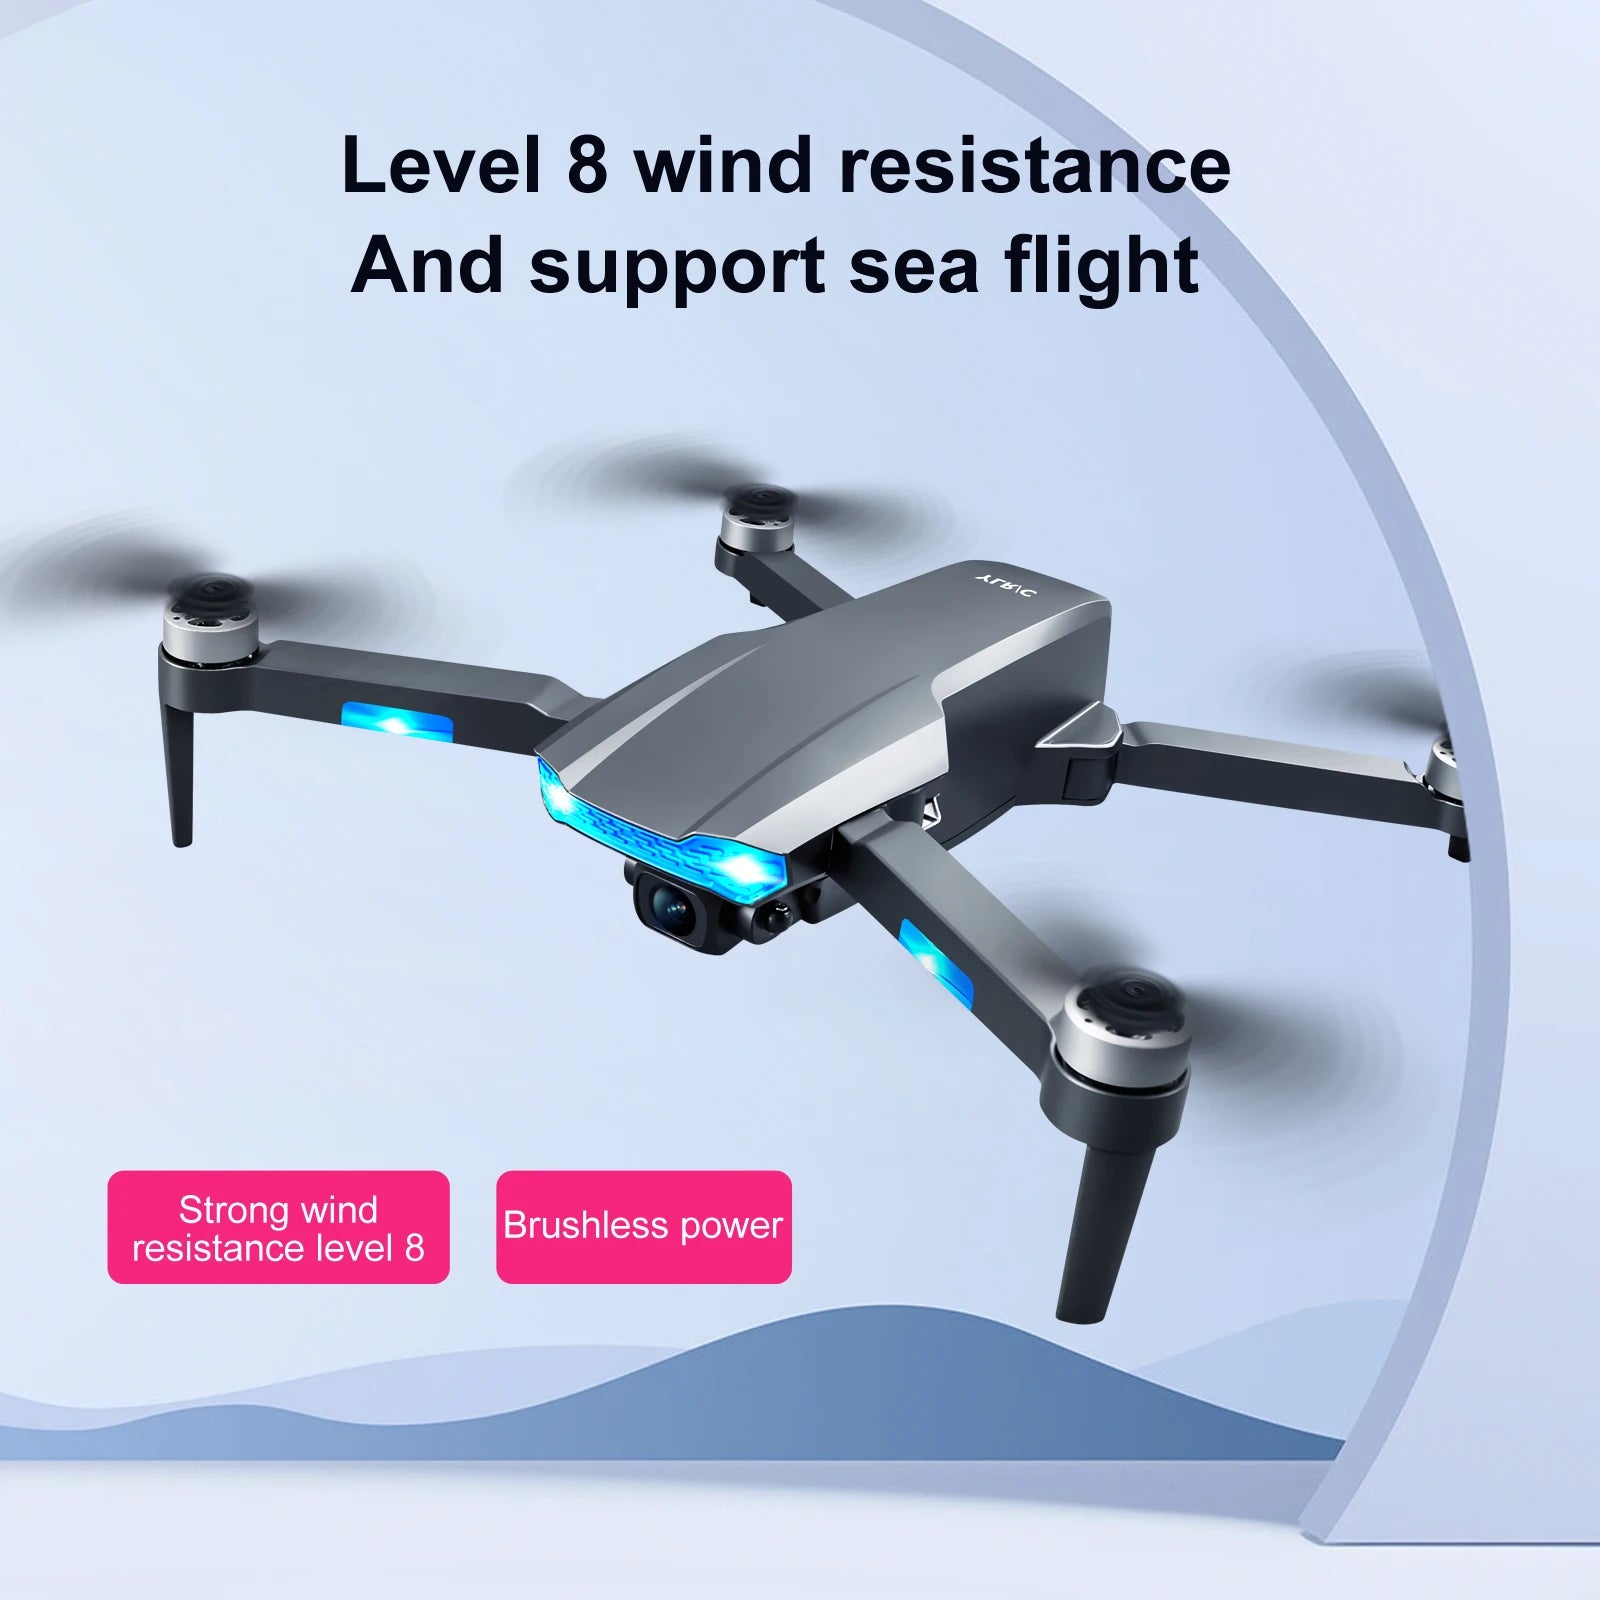 QJ S106 GPS Drone, level 8 wind resistance and support sea flight strong wind brushless power resistance